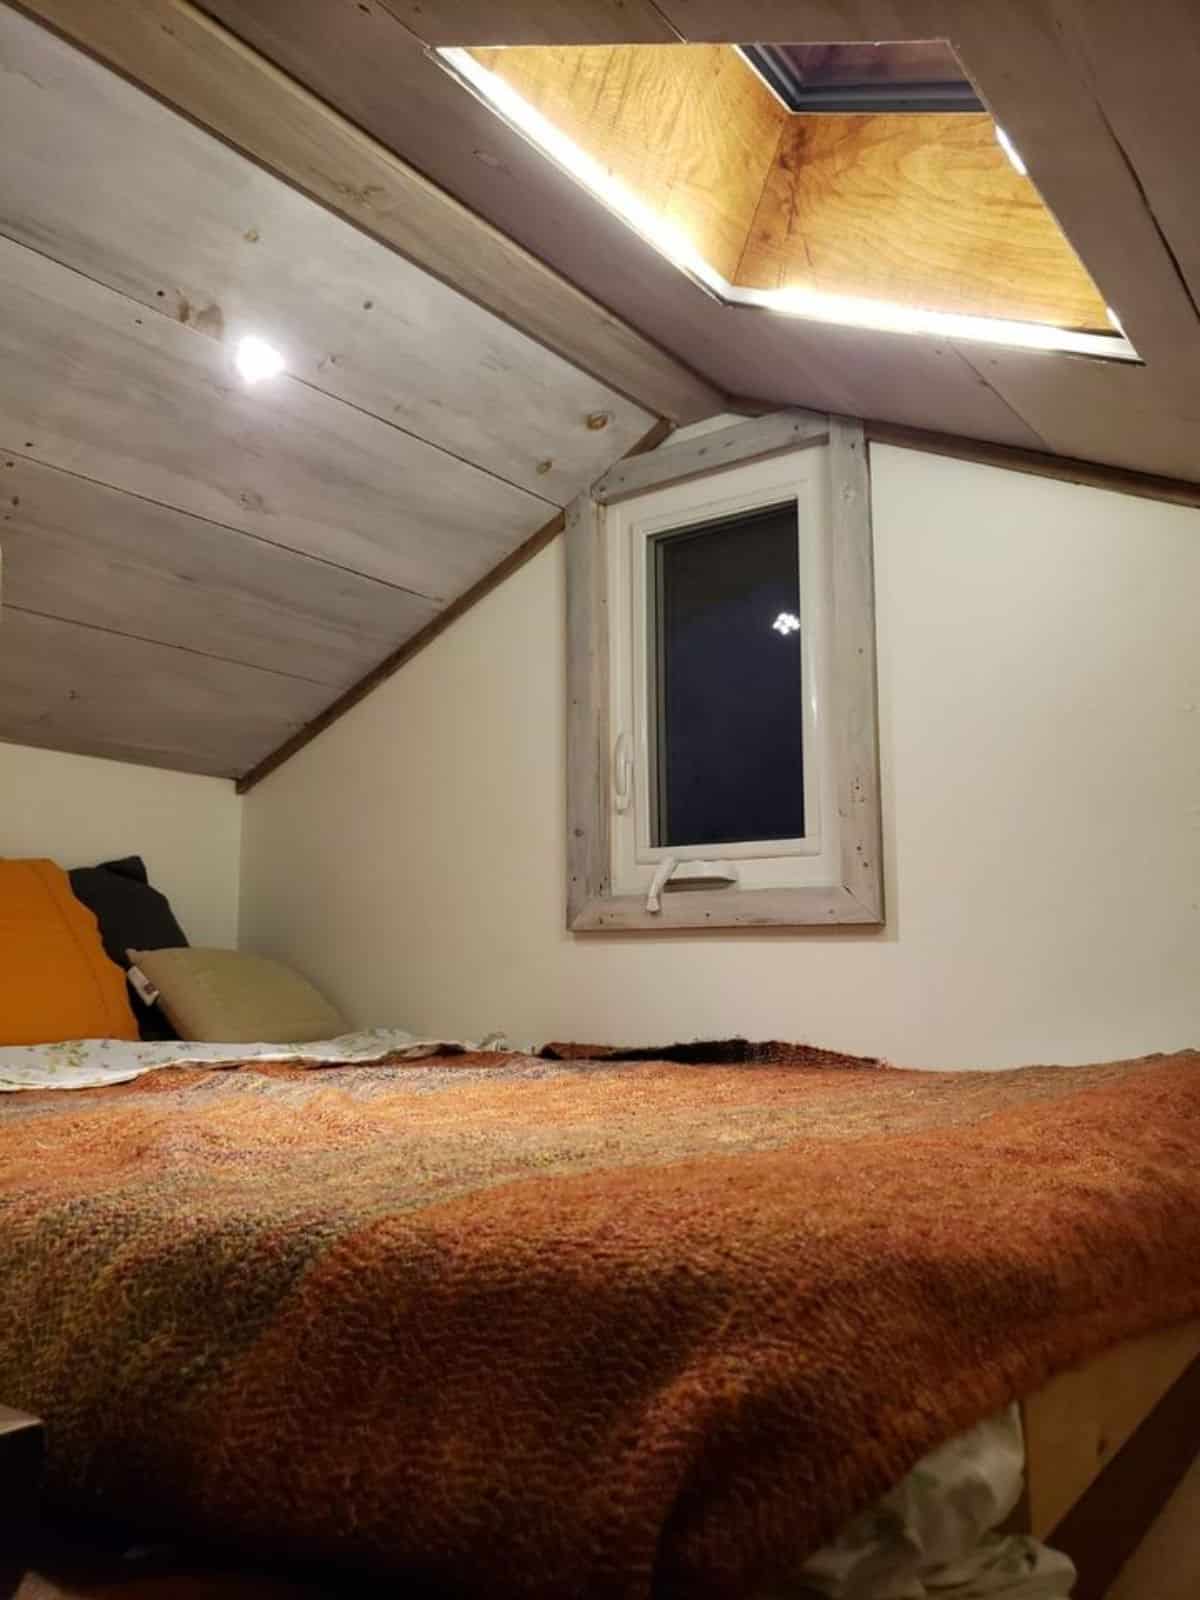 loft 2 also has a comfortable mattress and skylight to stargaze at night makes it very romantic